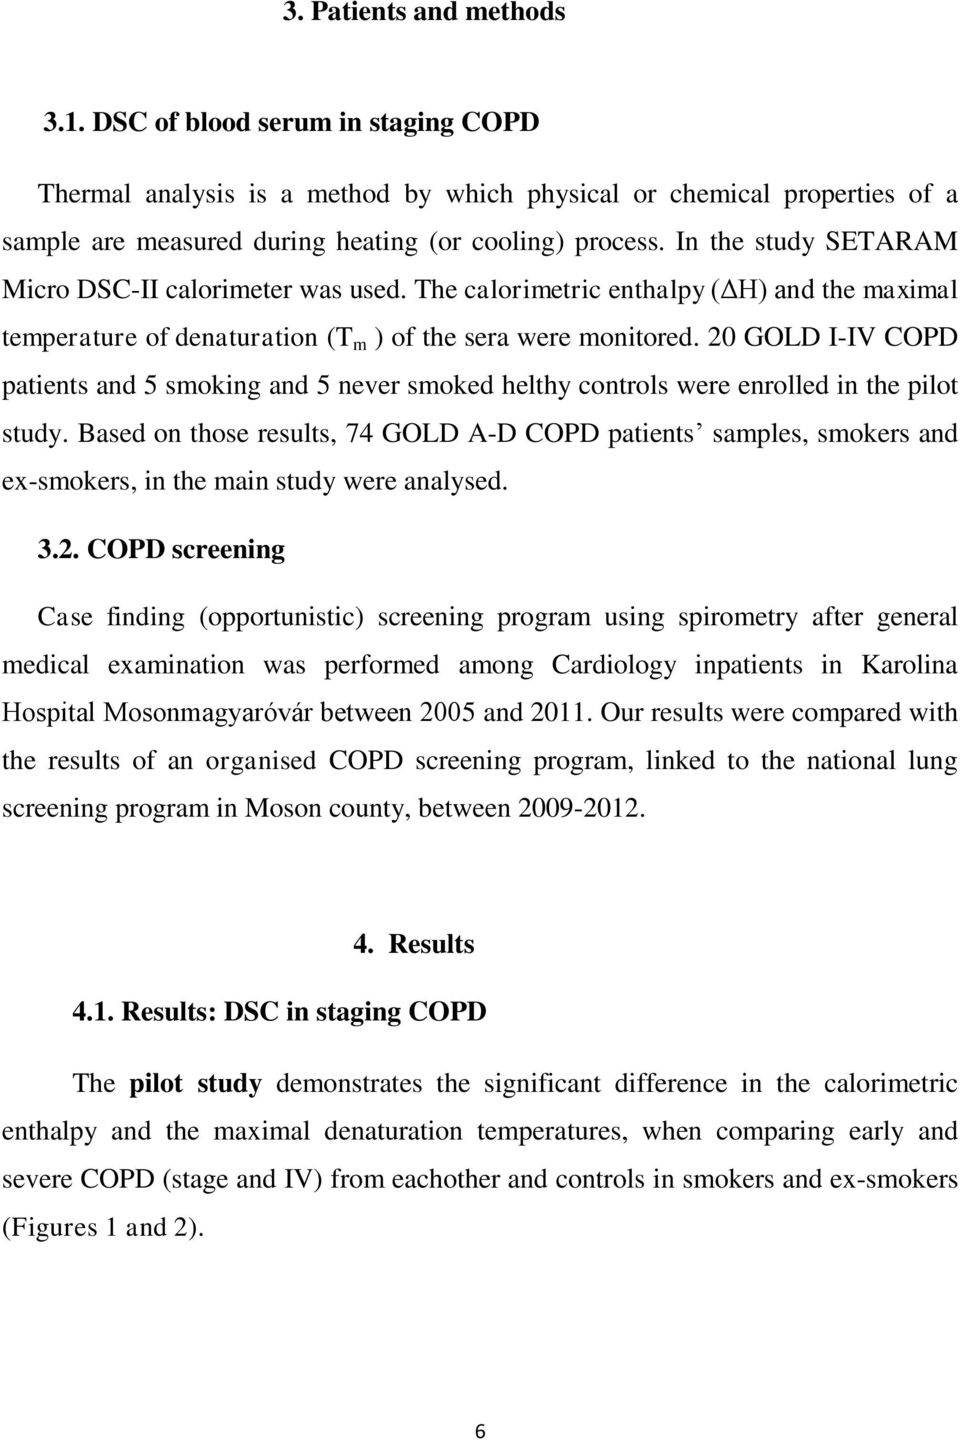 20 GOLD I-IV COPD patients and 5 smoking and 5 never smoked helthy controls were enrolled in the pilot study.